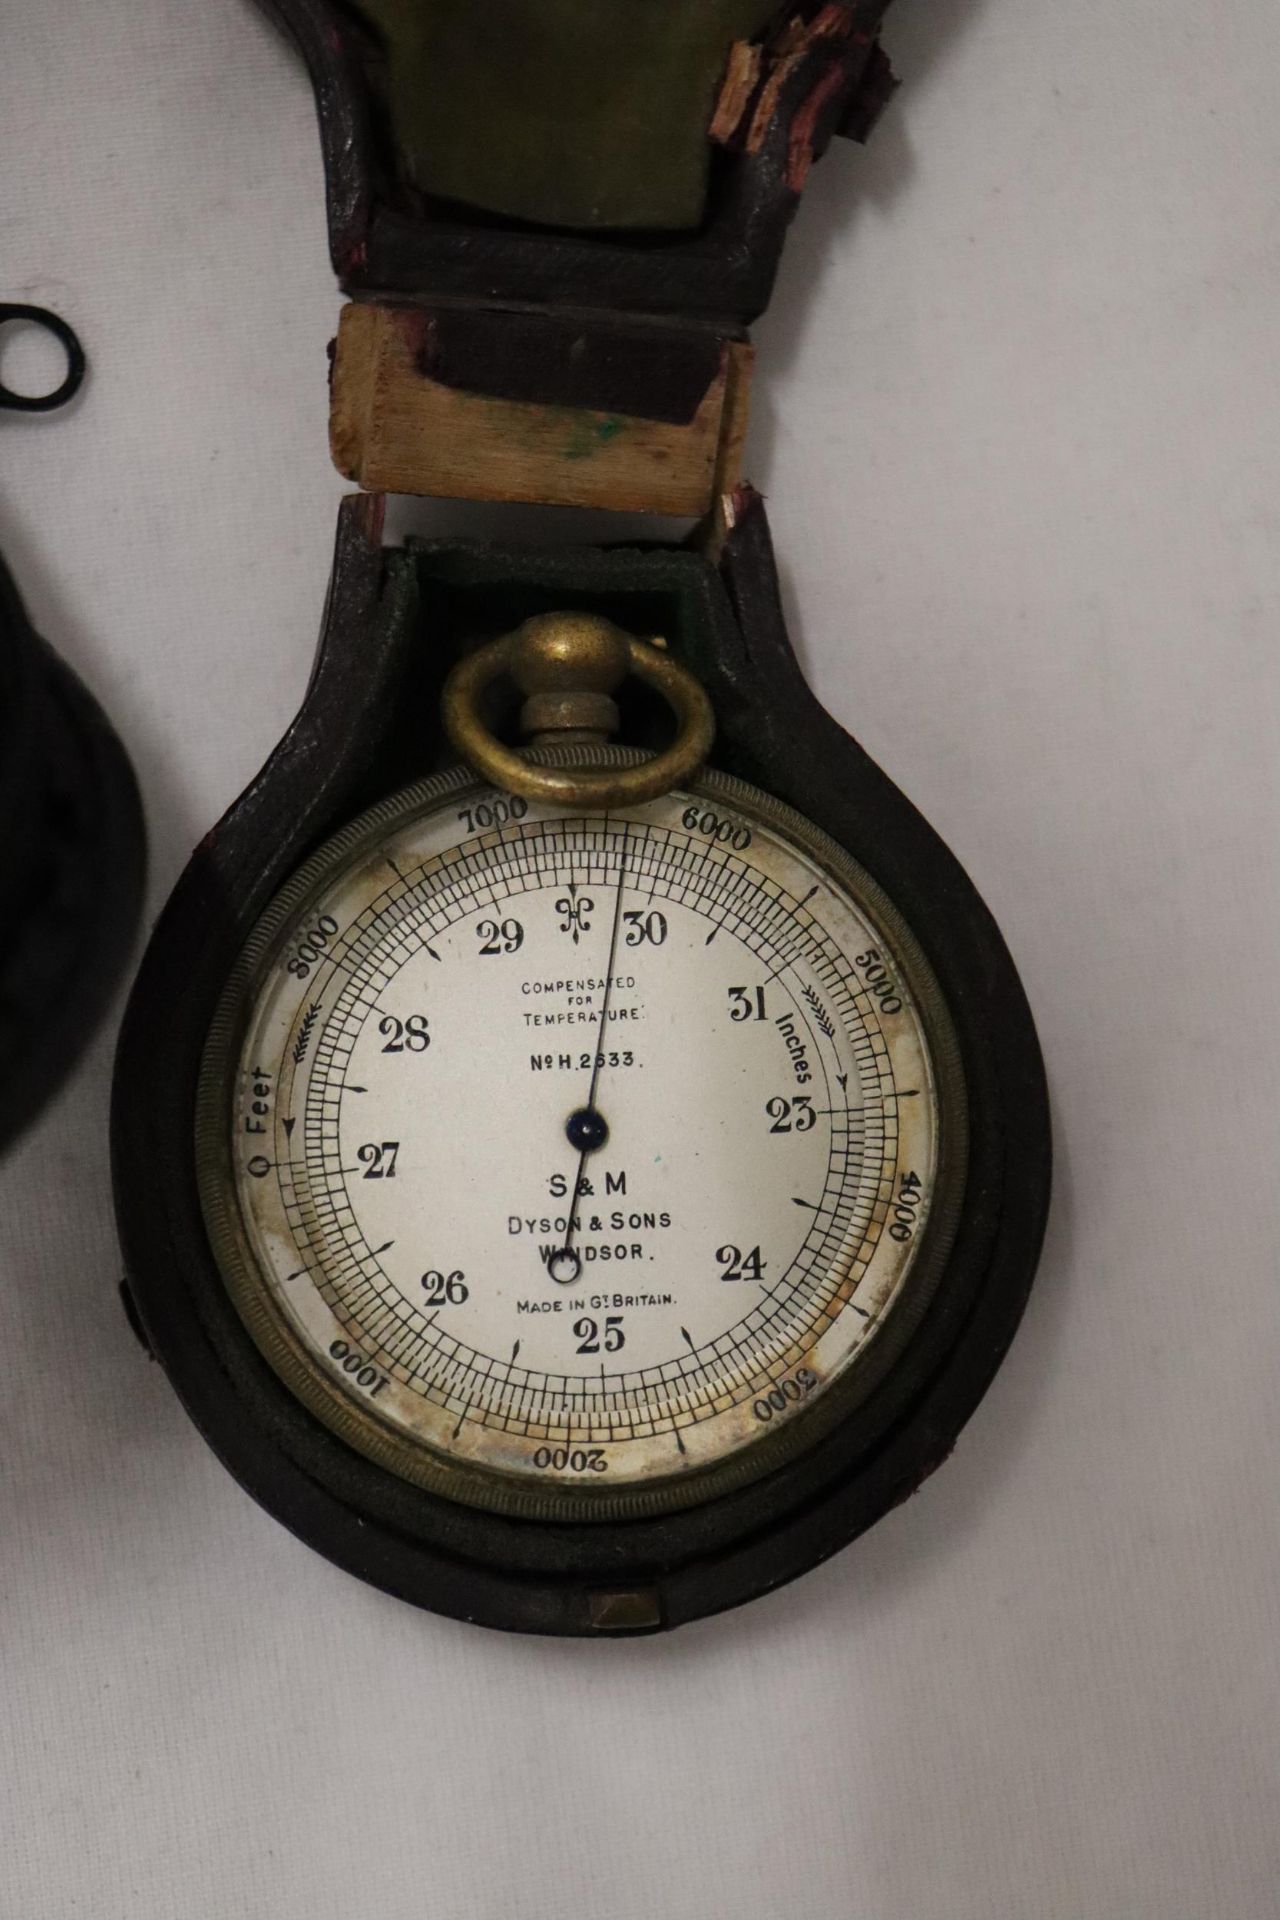 A VINTAGE COMPASS IN AN OAK CASE, A COMPENSATED FOR TEMPERATURE INSTUMENT, MADE BY S & M, DYSON & - Image 5 of 7